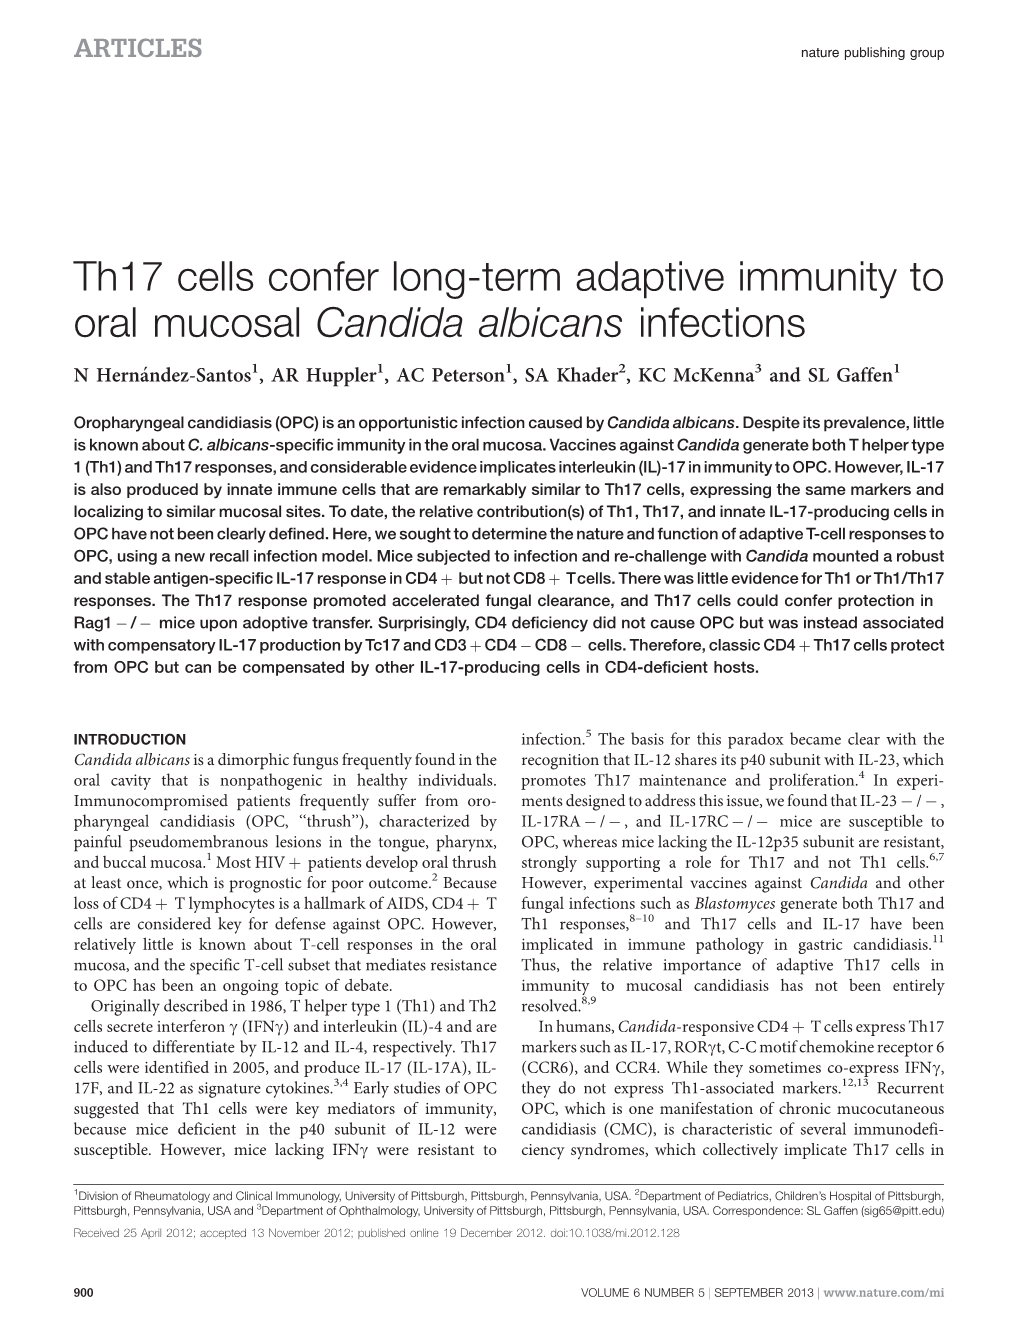 Th17 Cells Confer Long-Term Adaptive Immunity to Oral Mucosal Candida Albicans Infections